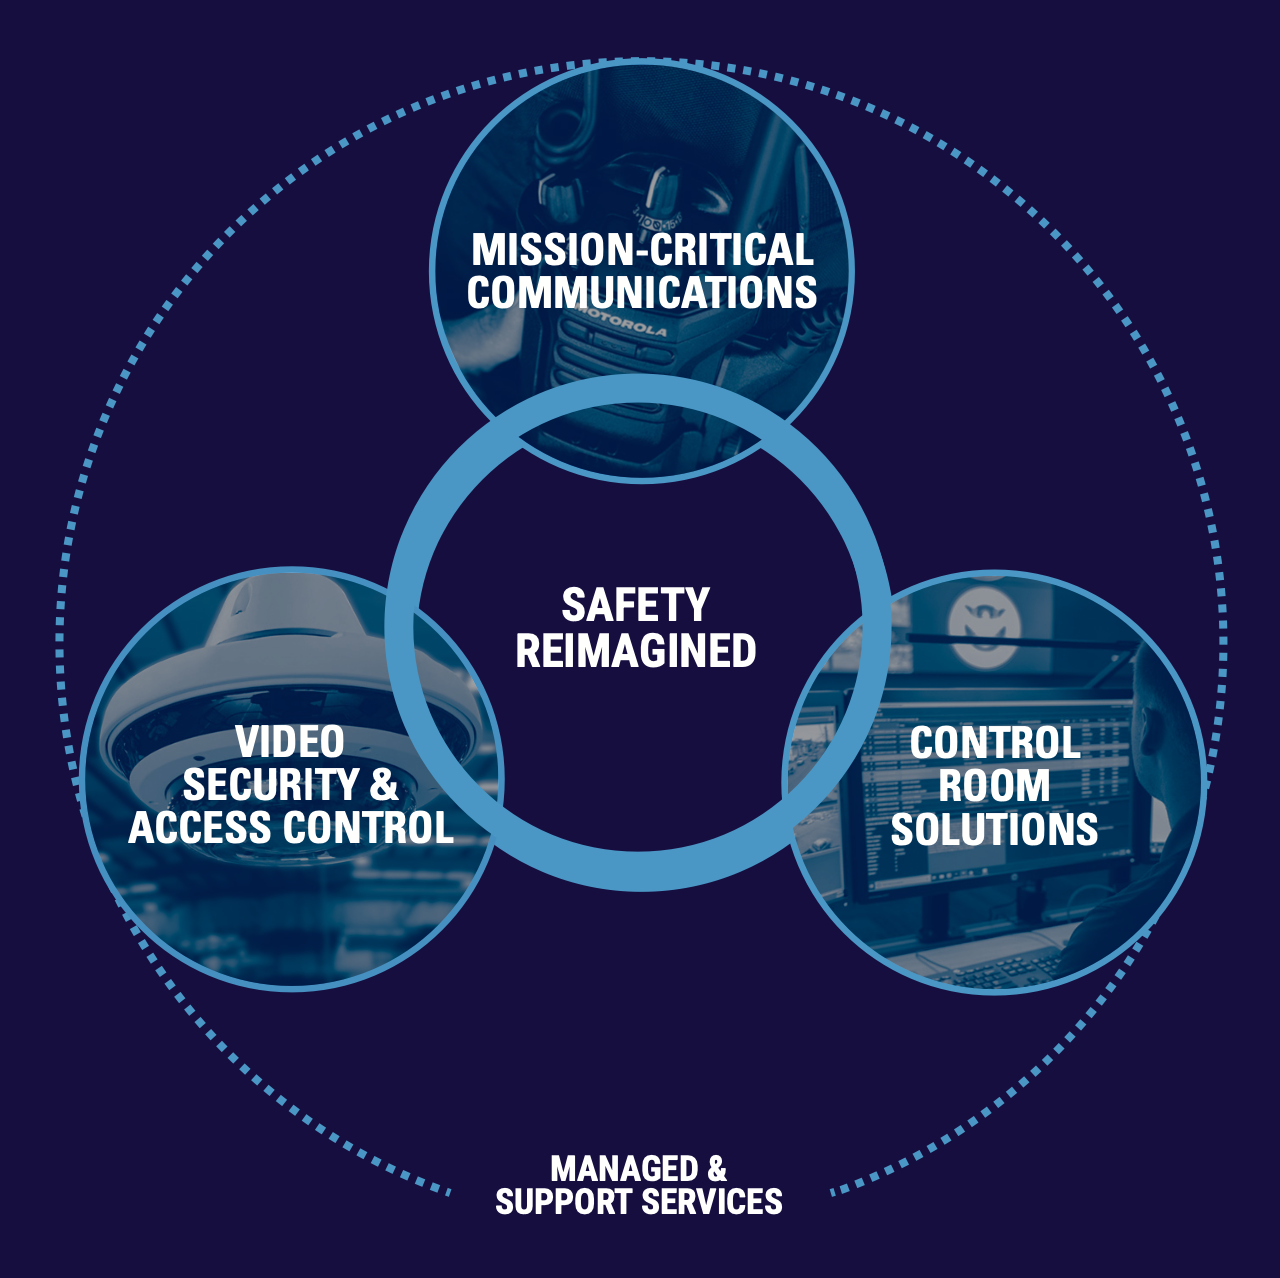 Safety reimagined ecosystem